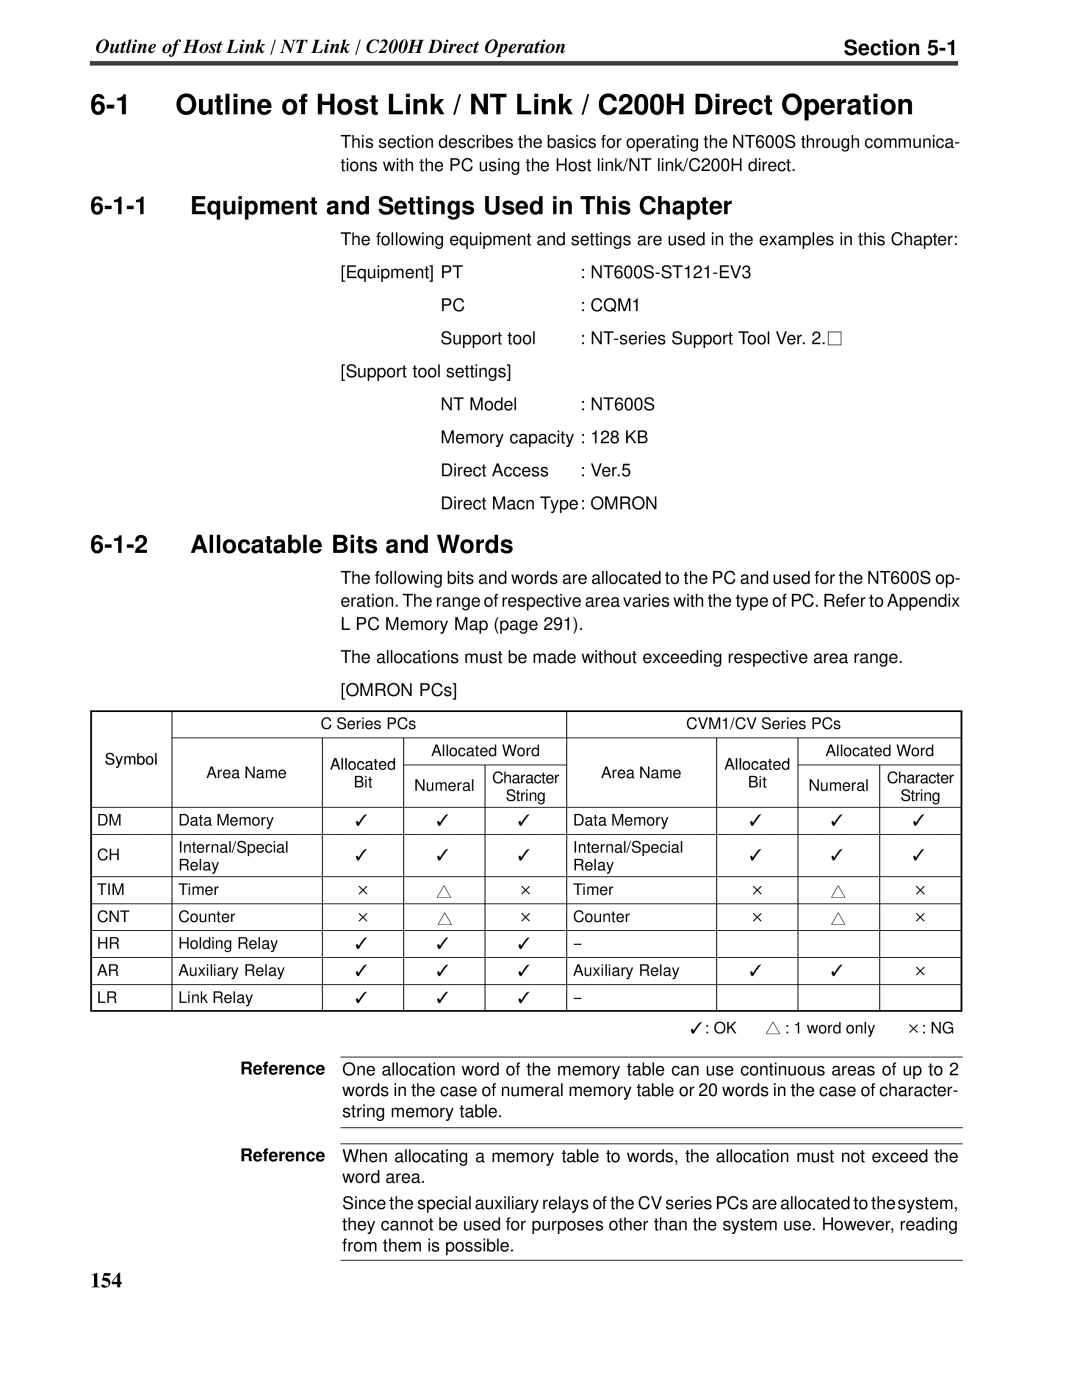 Omron V022-E3-1 Equipment and Settings Used in This Chapter, Allocatable Bits and Words, 6-1-1, 6-1-2, Section 